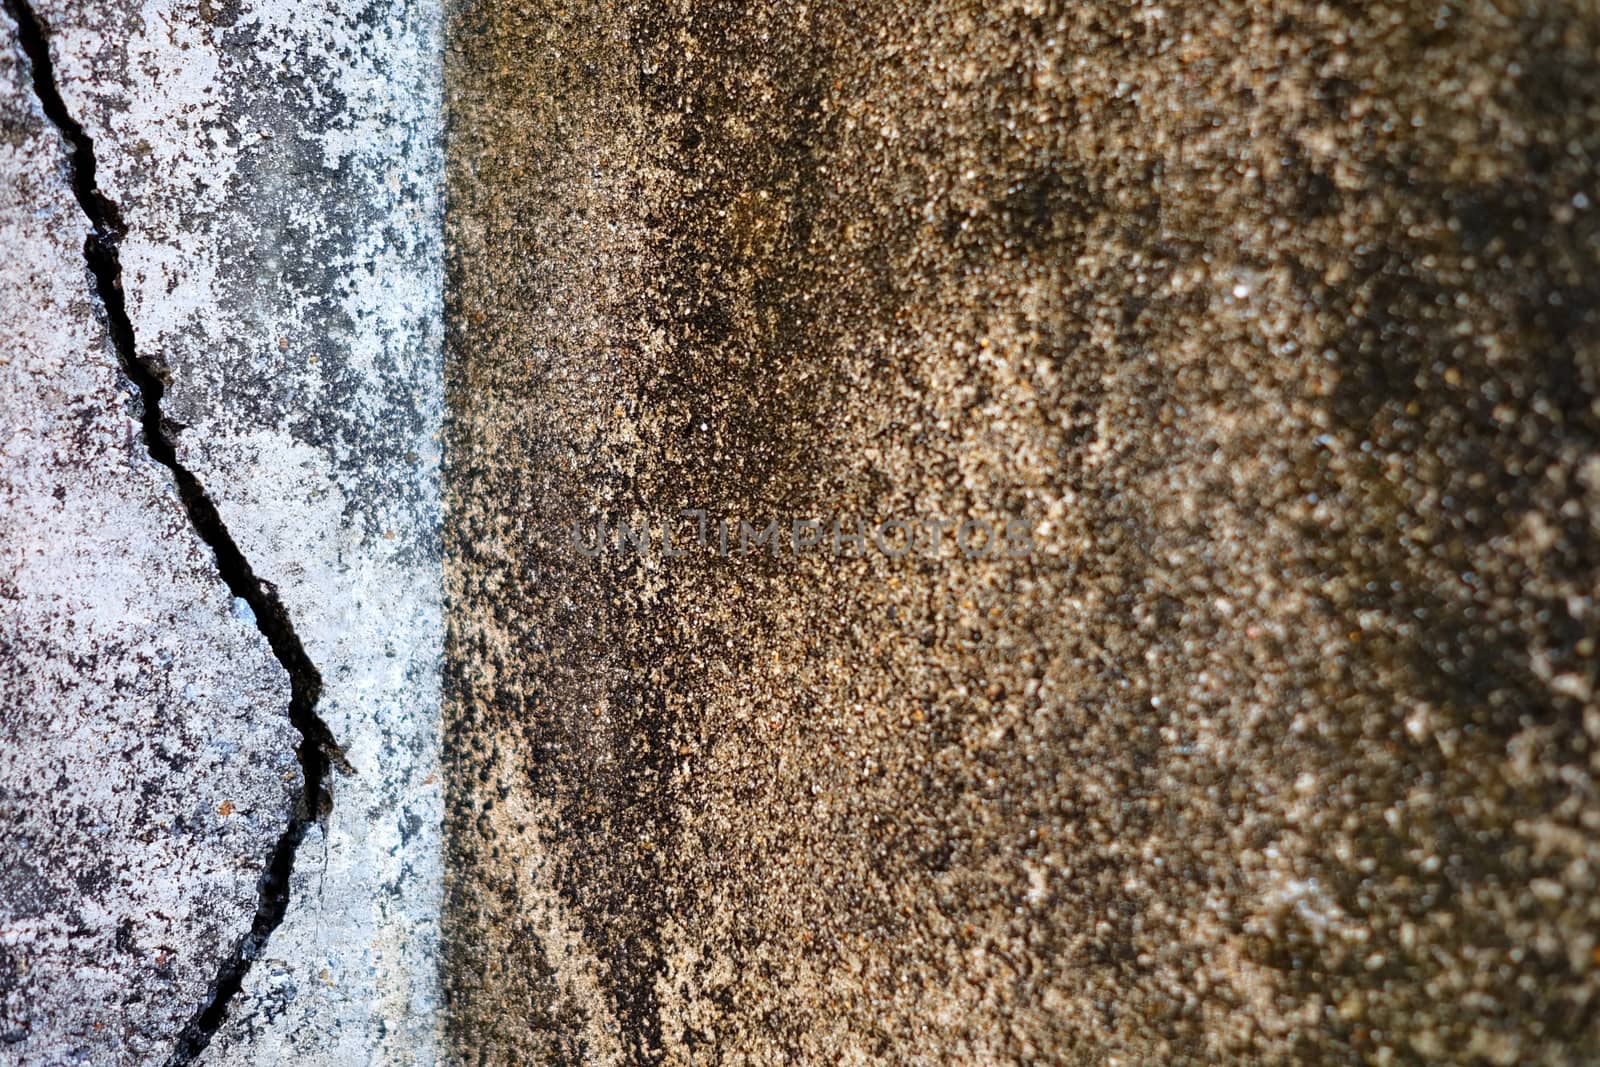 Closed-up Broken Concrete Wall Texture Background. (Selective Focus) by mesamong